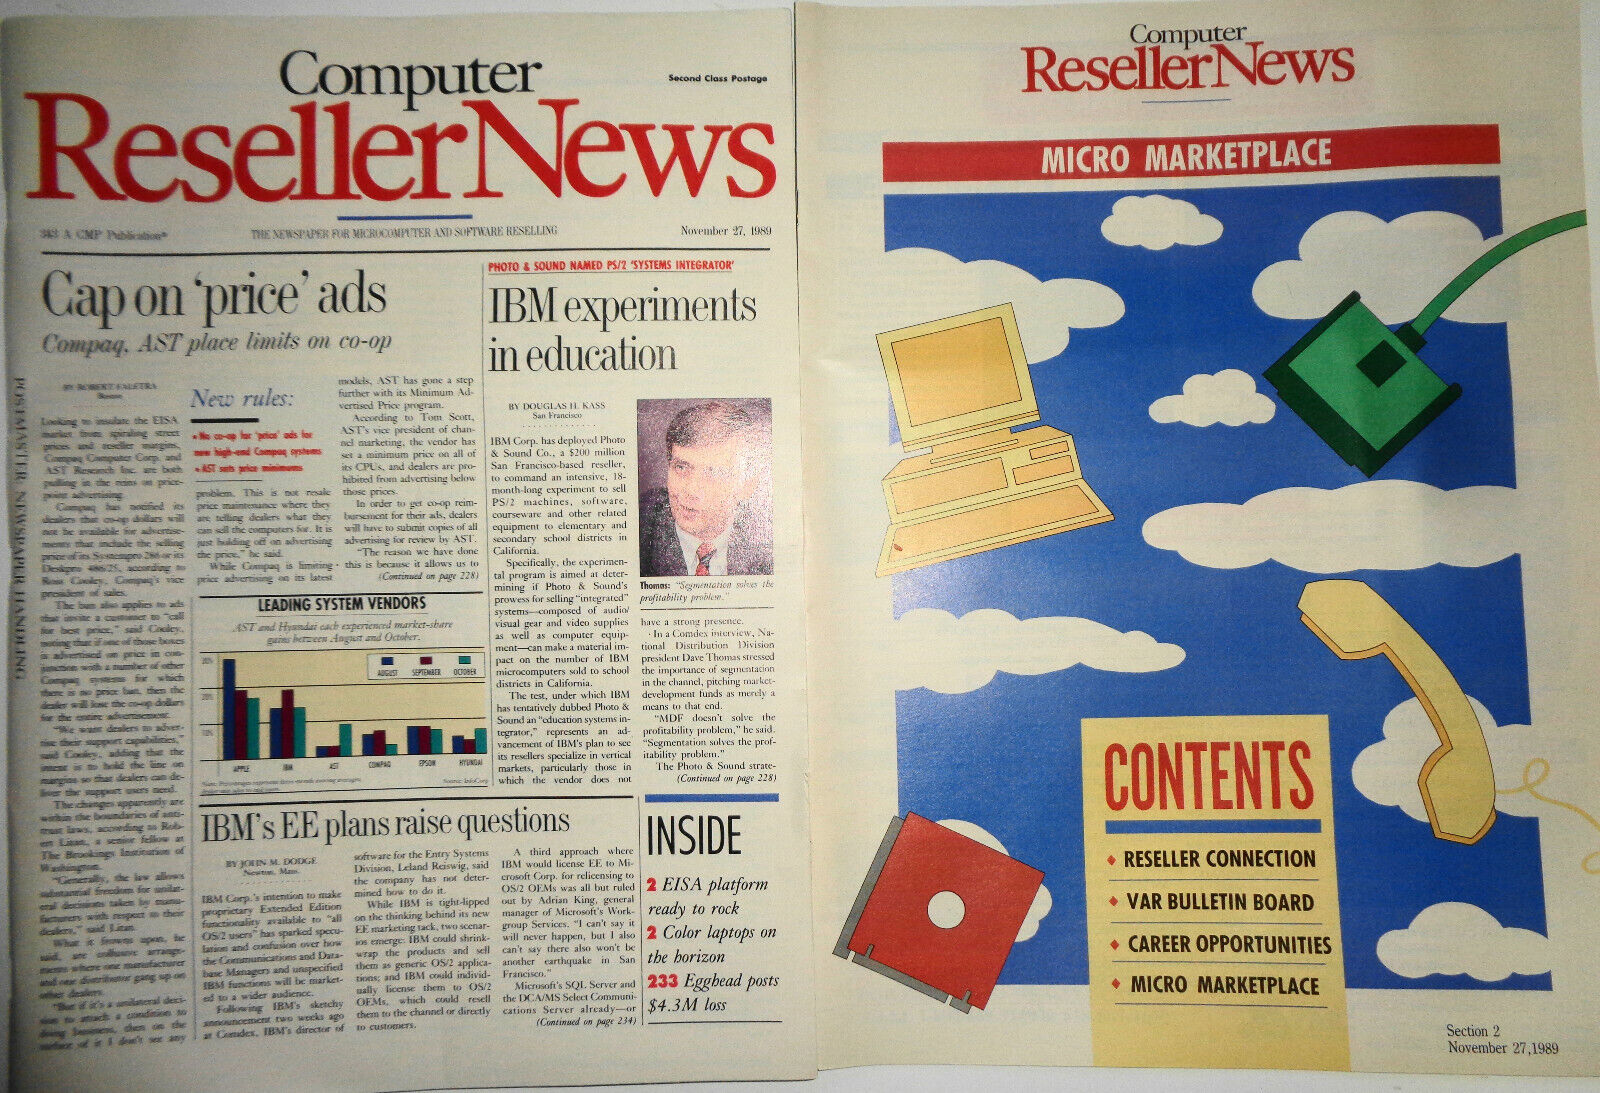 Computer Reseller News - November 27, 1989  With Micro Marketplace report -  new